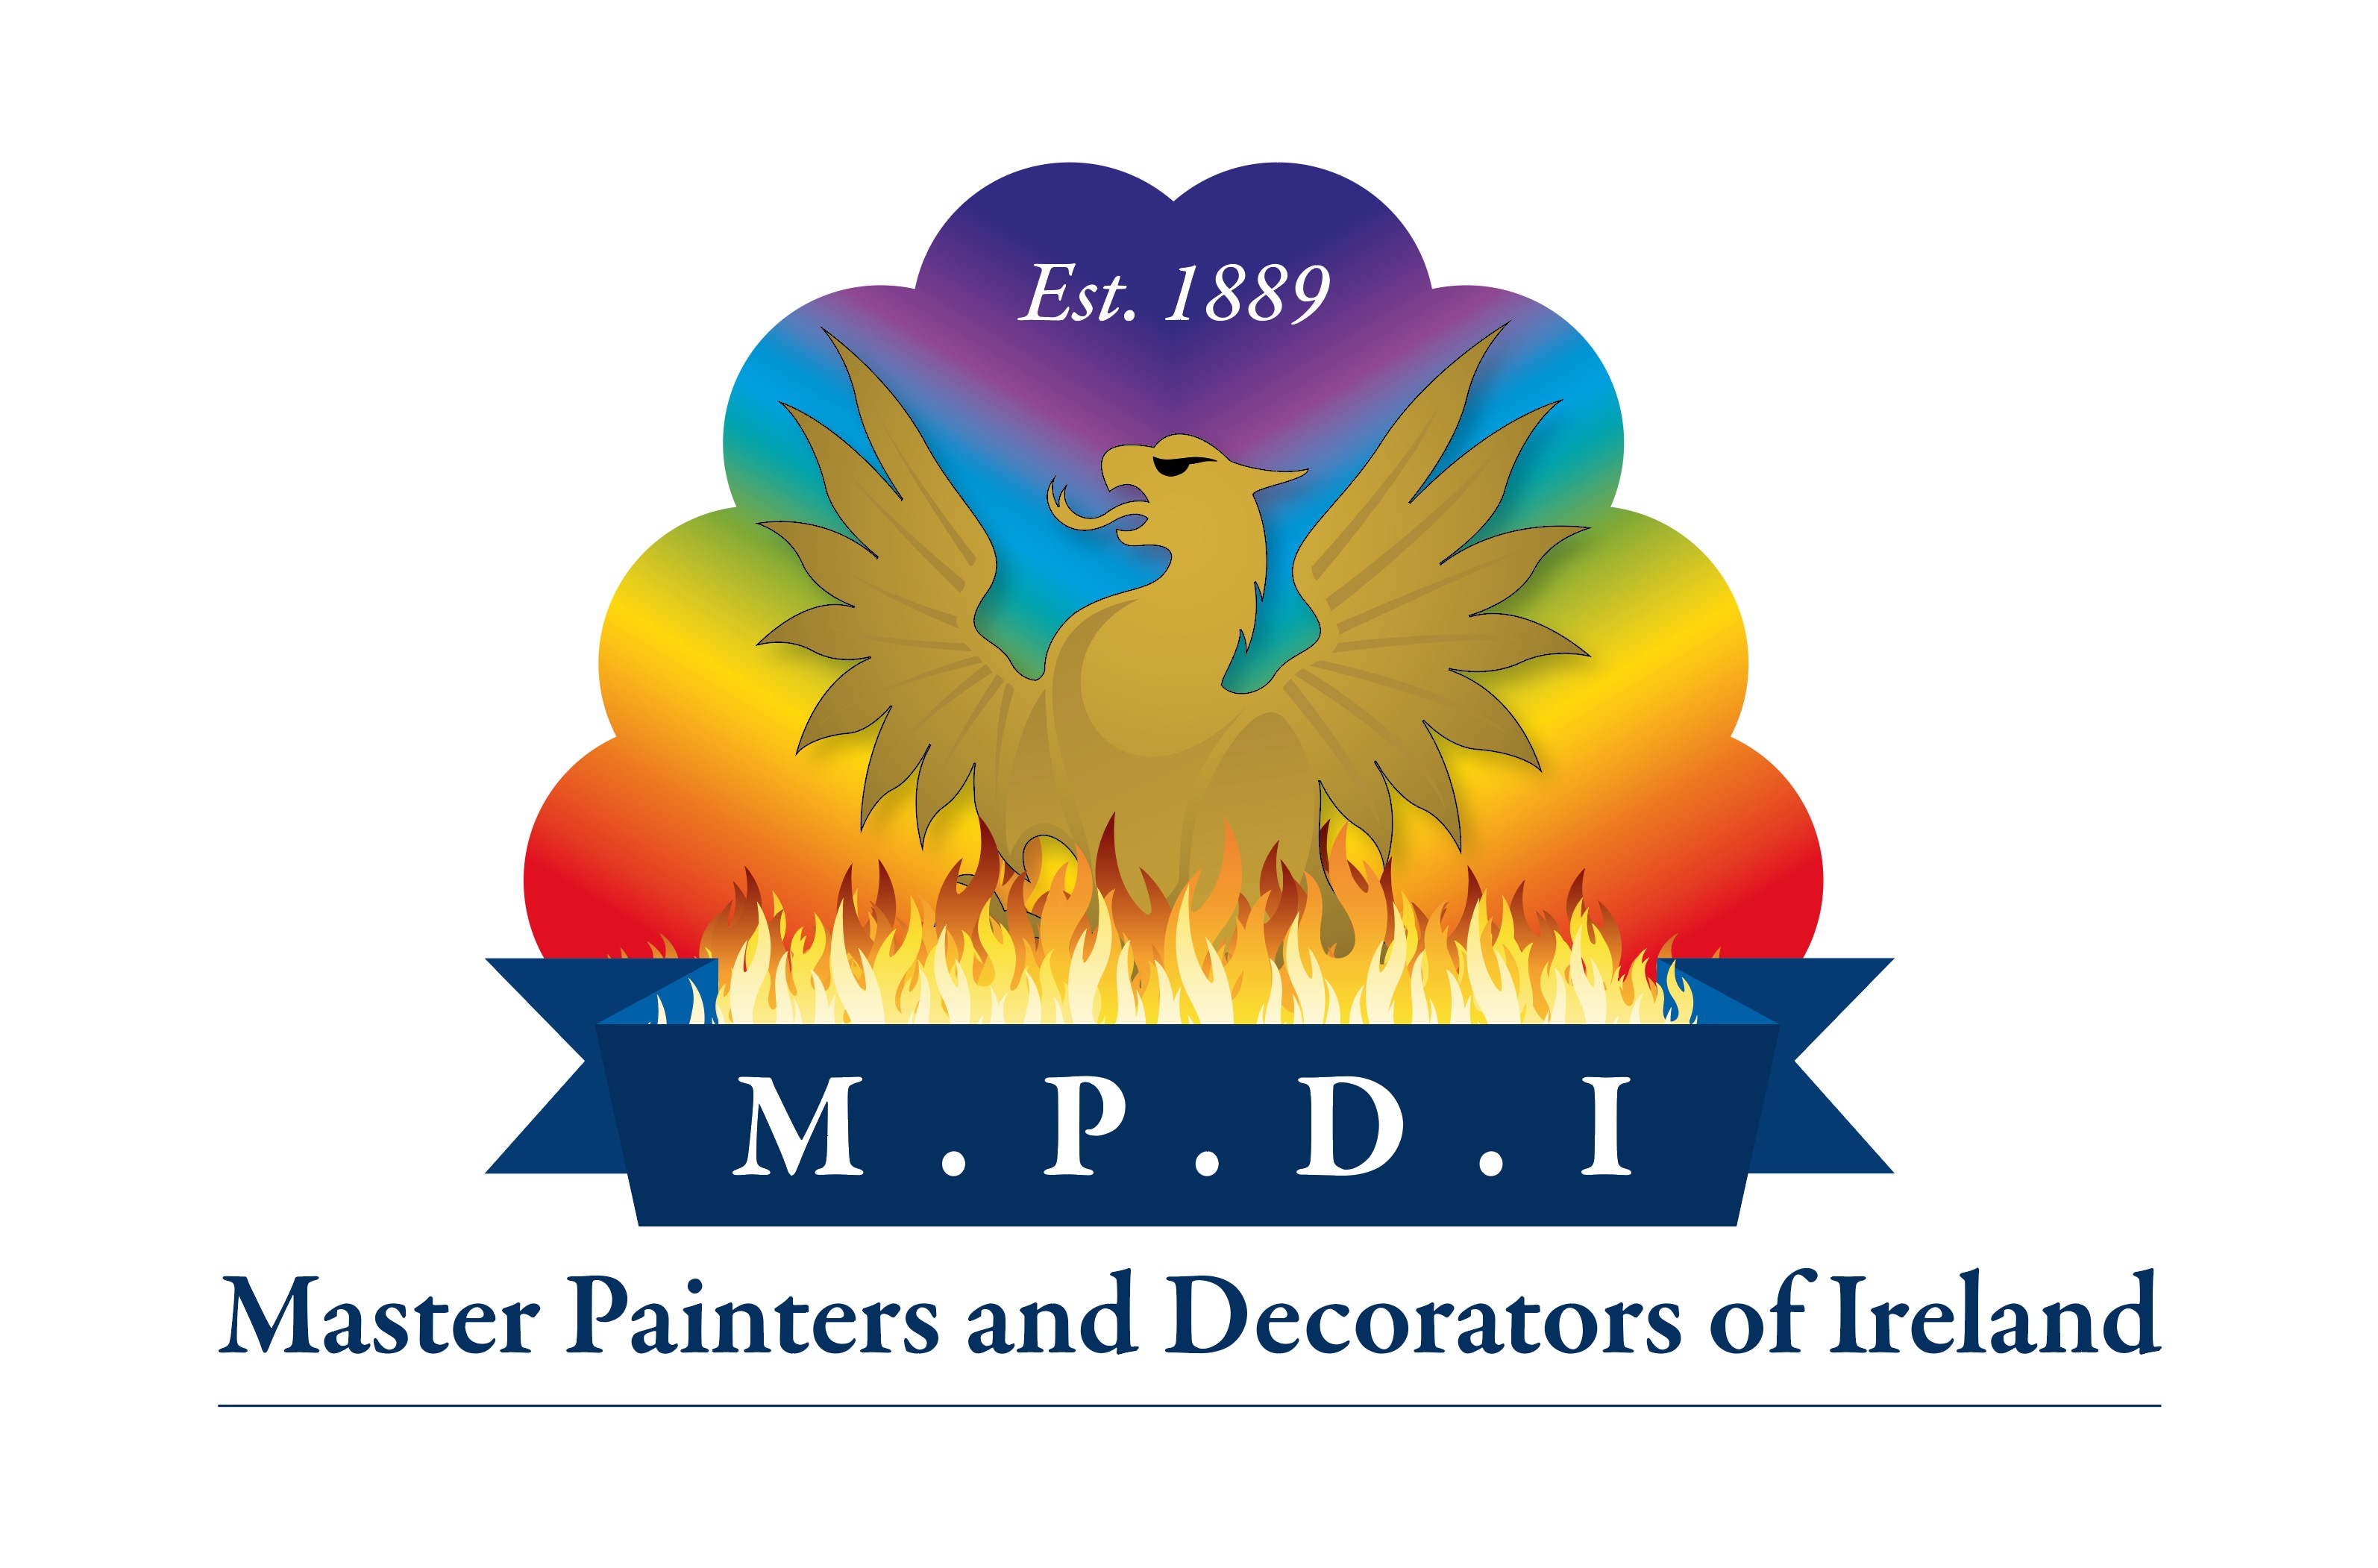 The Master Painters and Decorators of Ireland (MPDI)